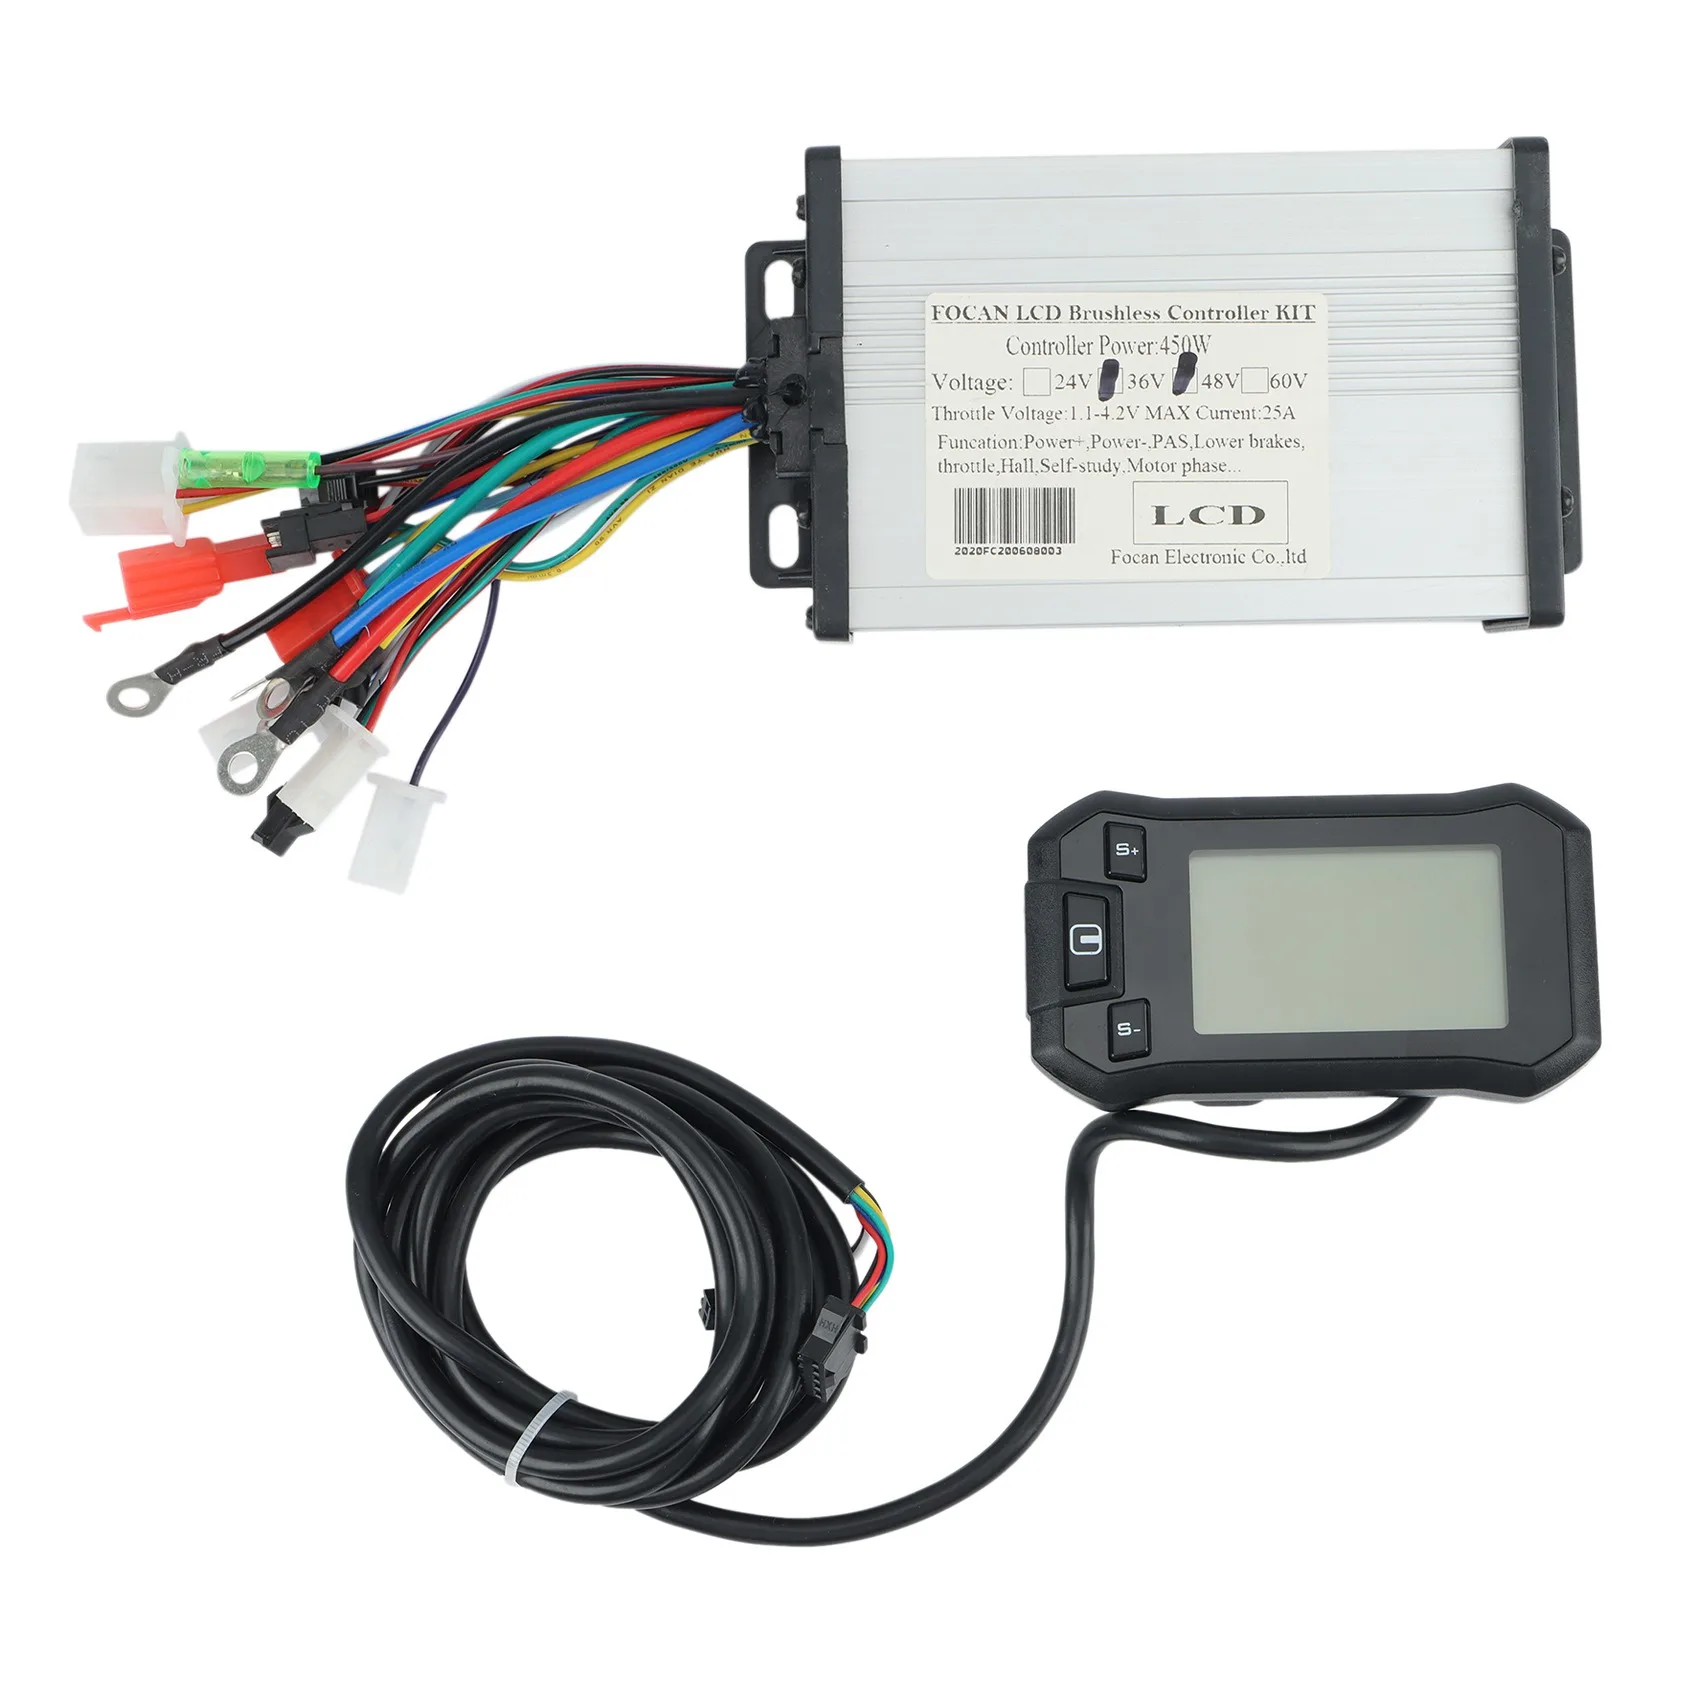 36/48V 450W E-Bike S850 LCD Display Brushless Motor Controller Kit for Electric Bicycle Scooter Folding Bike Equipment